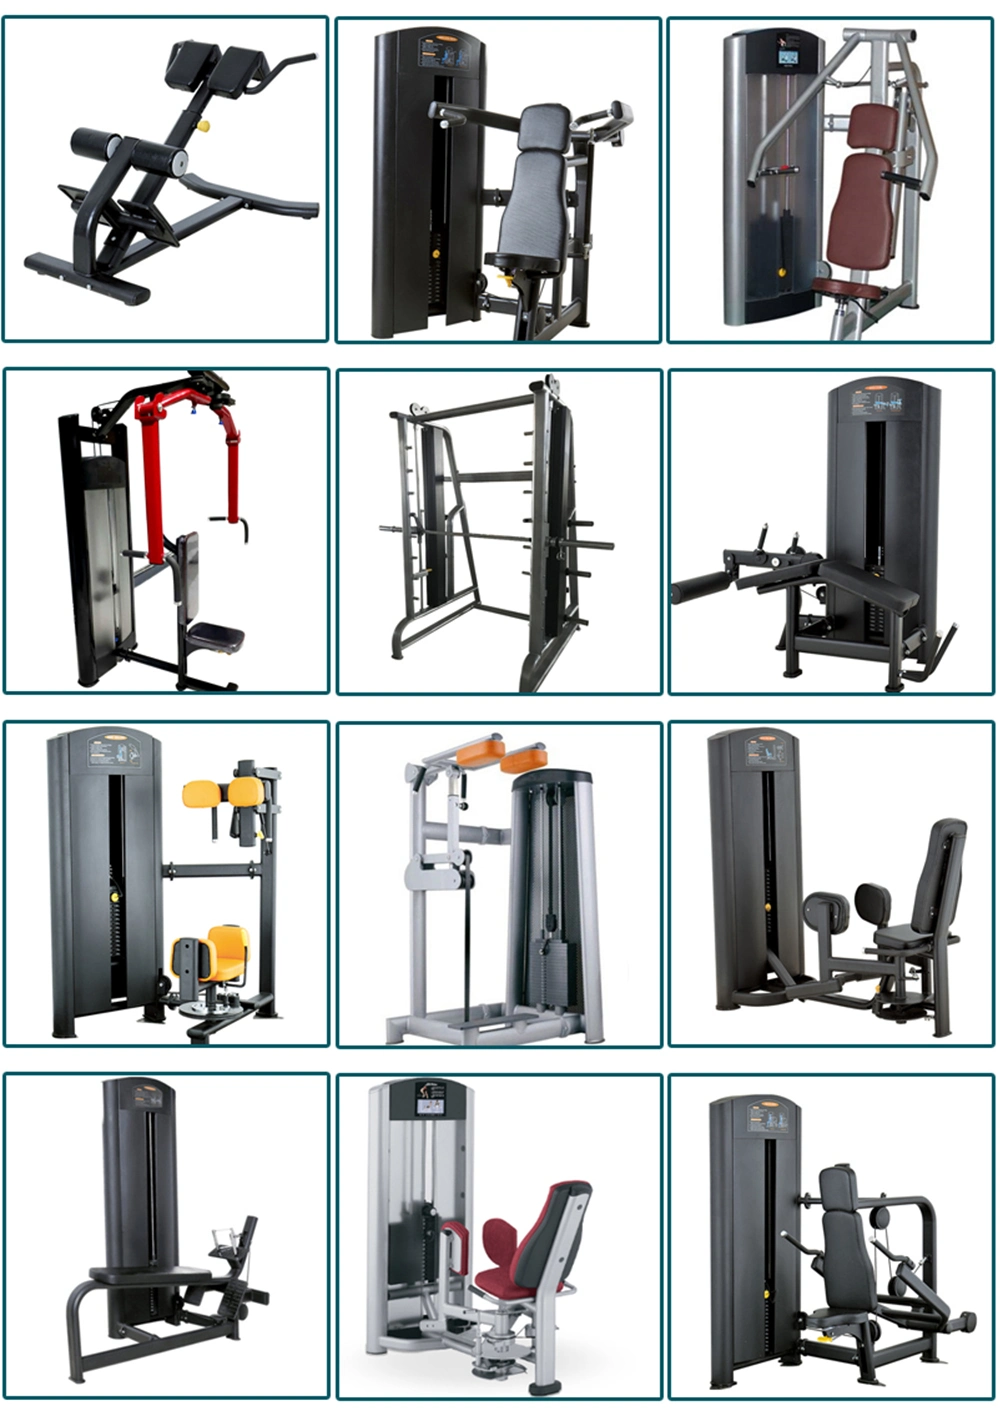 High Quality Gym Fitness Equipment-Pec Fly/Rear Delt